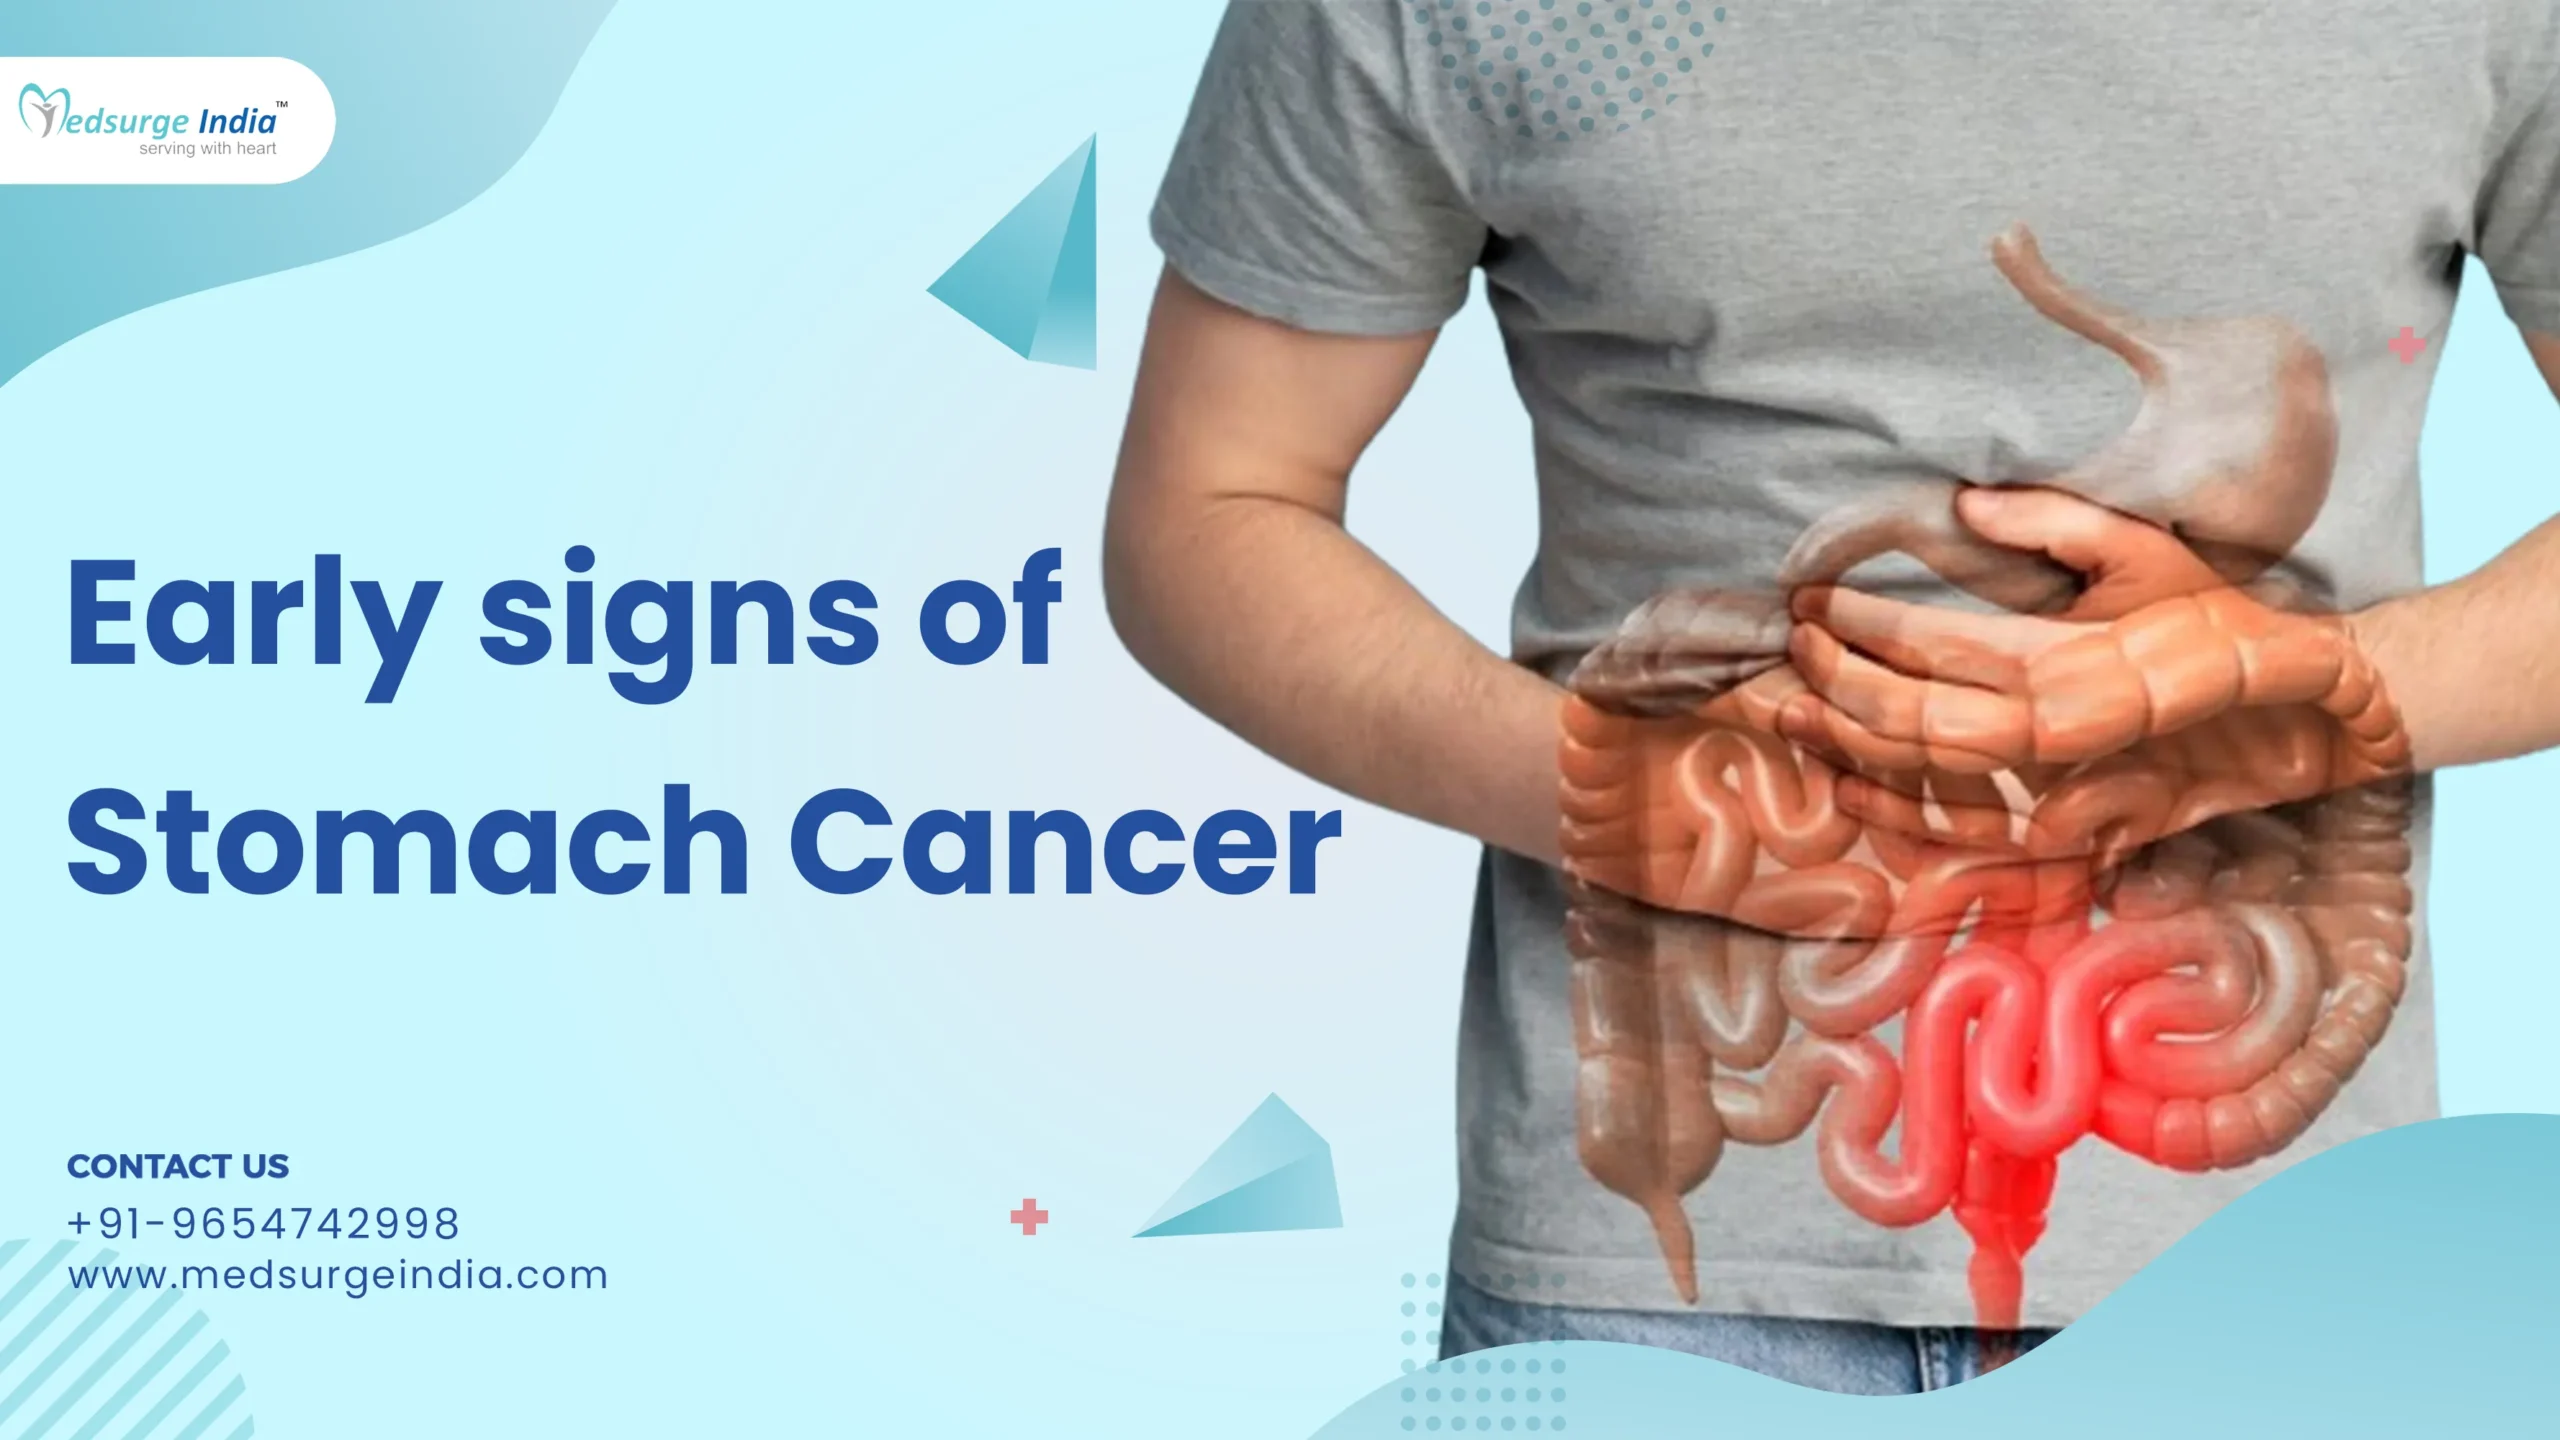 Signs of stomach cancer